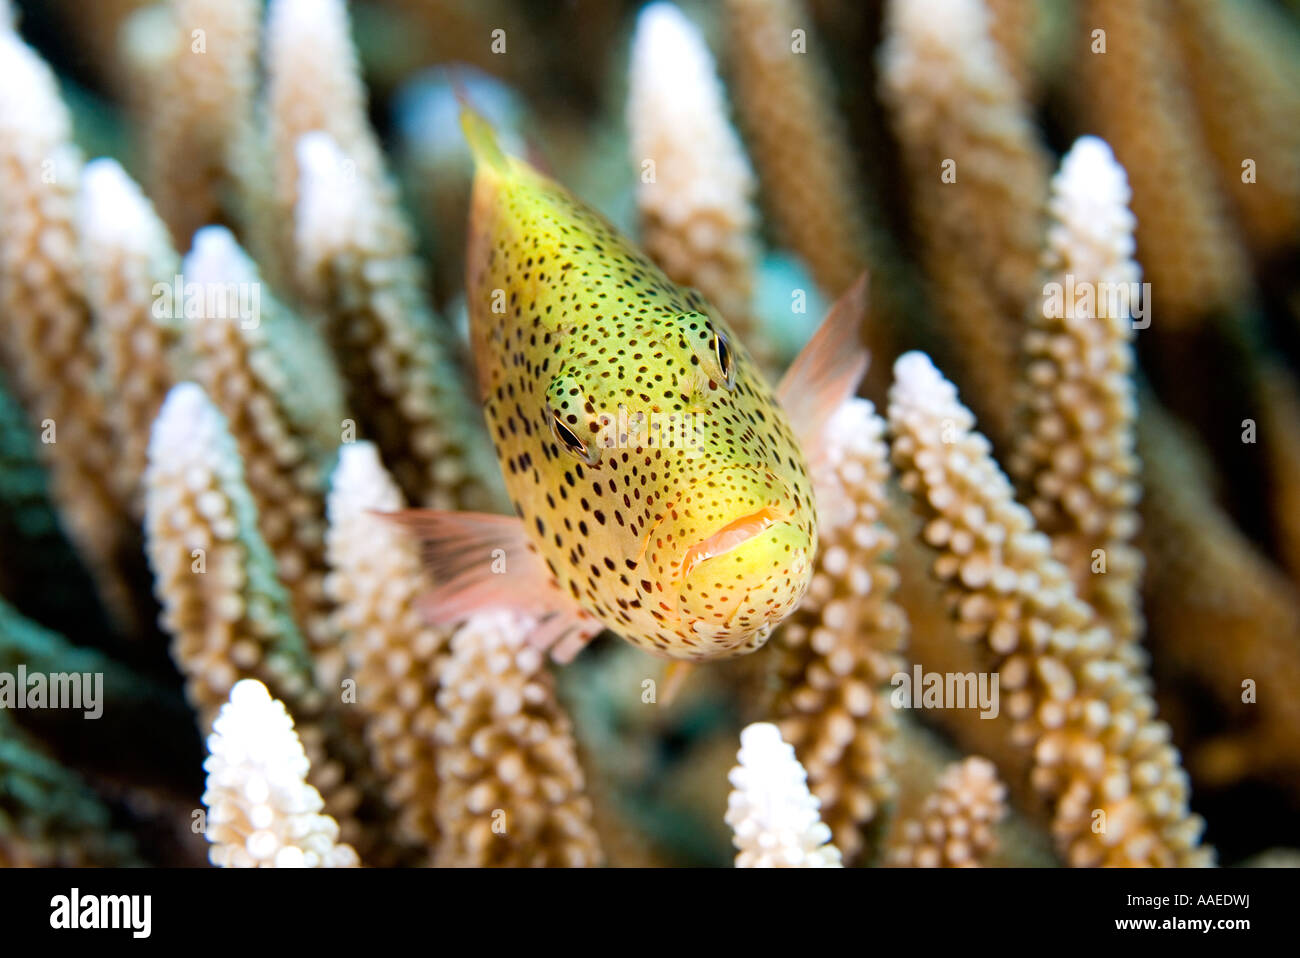 Blackside Hawkfish or Forsters Hawkfish, Paracirrhites forsteri, in coral Stock Photo